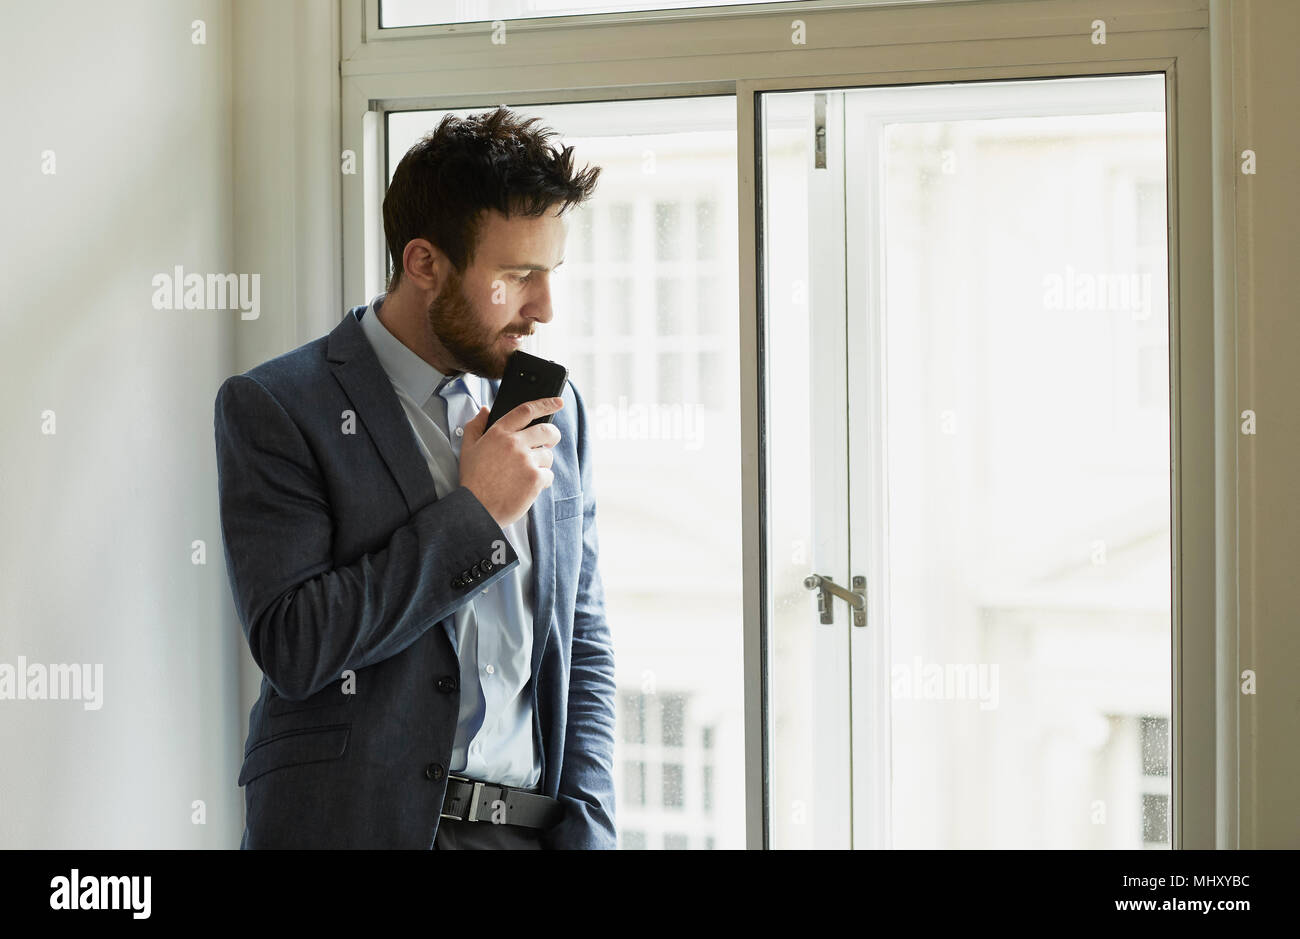 Businessman looking out of window pensively Stock Photo